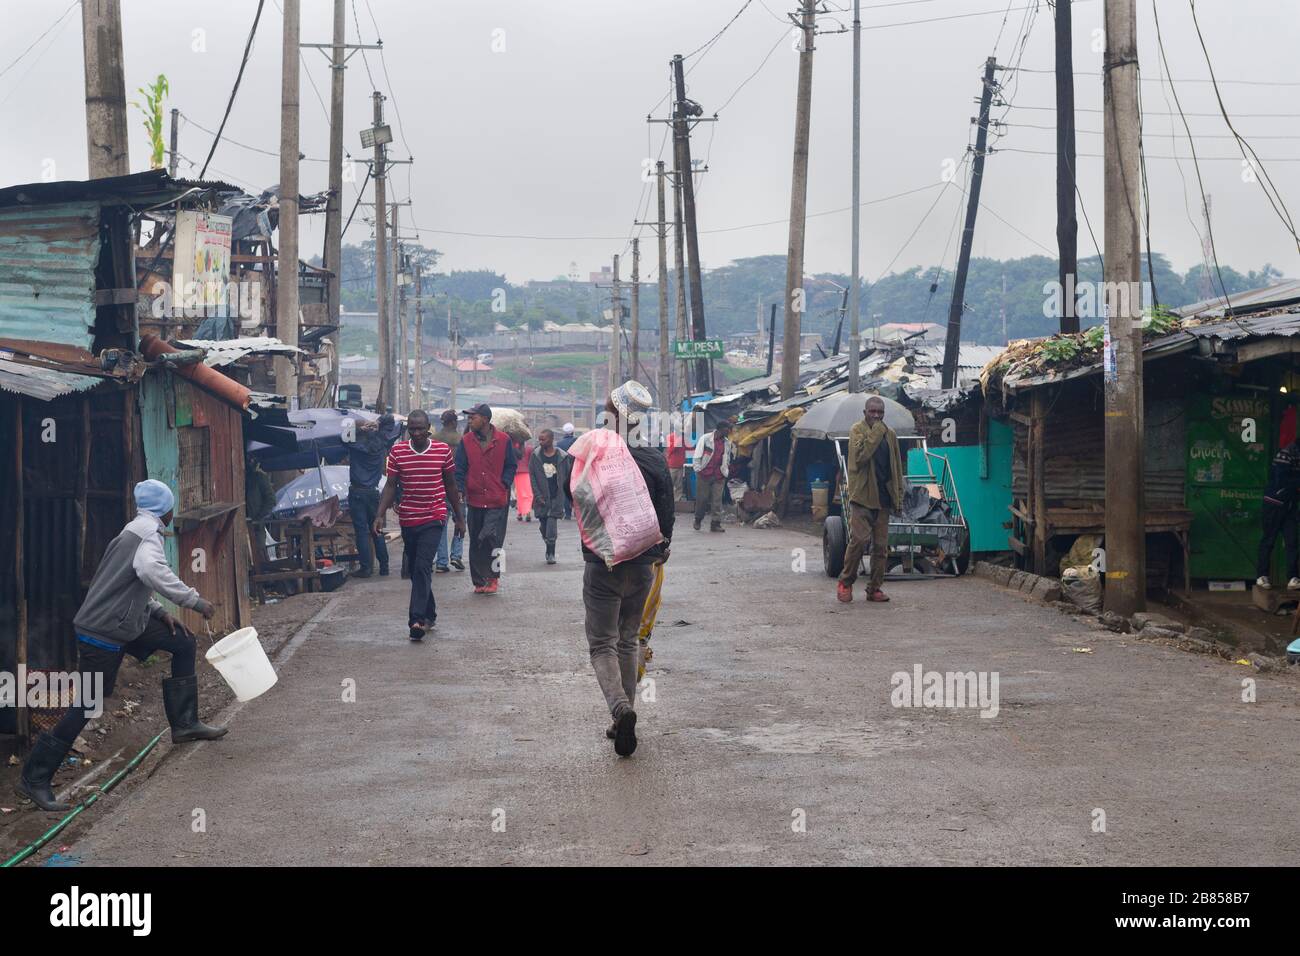 Road through Mathare slum, Nairobi, Kenya.  Mathare is a collection of slums in North East of central Nairobi, Kenya with a population of approximatel Stock Photo